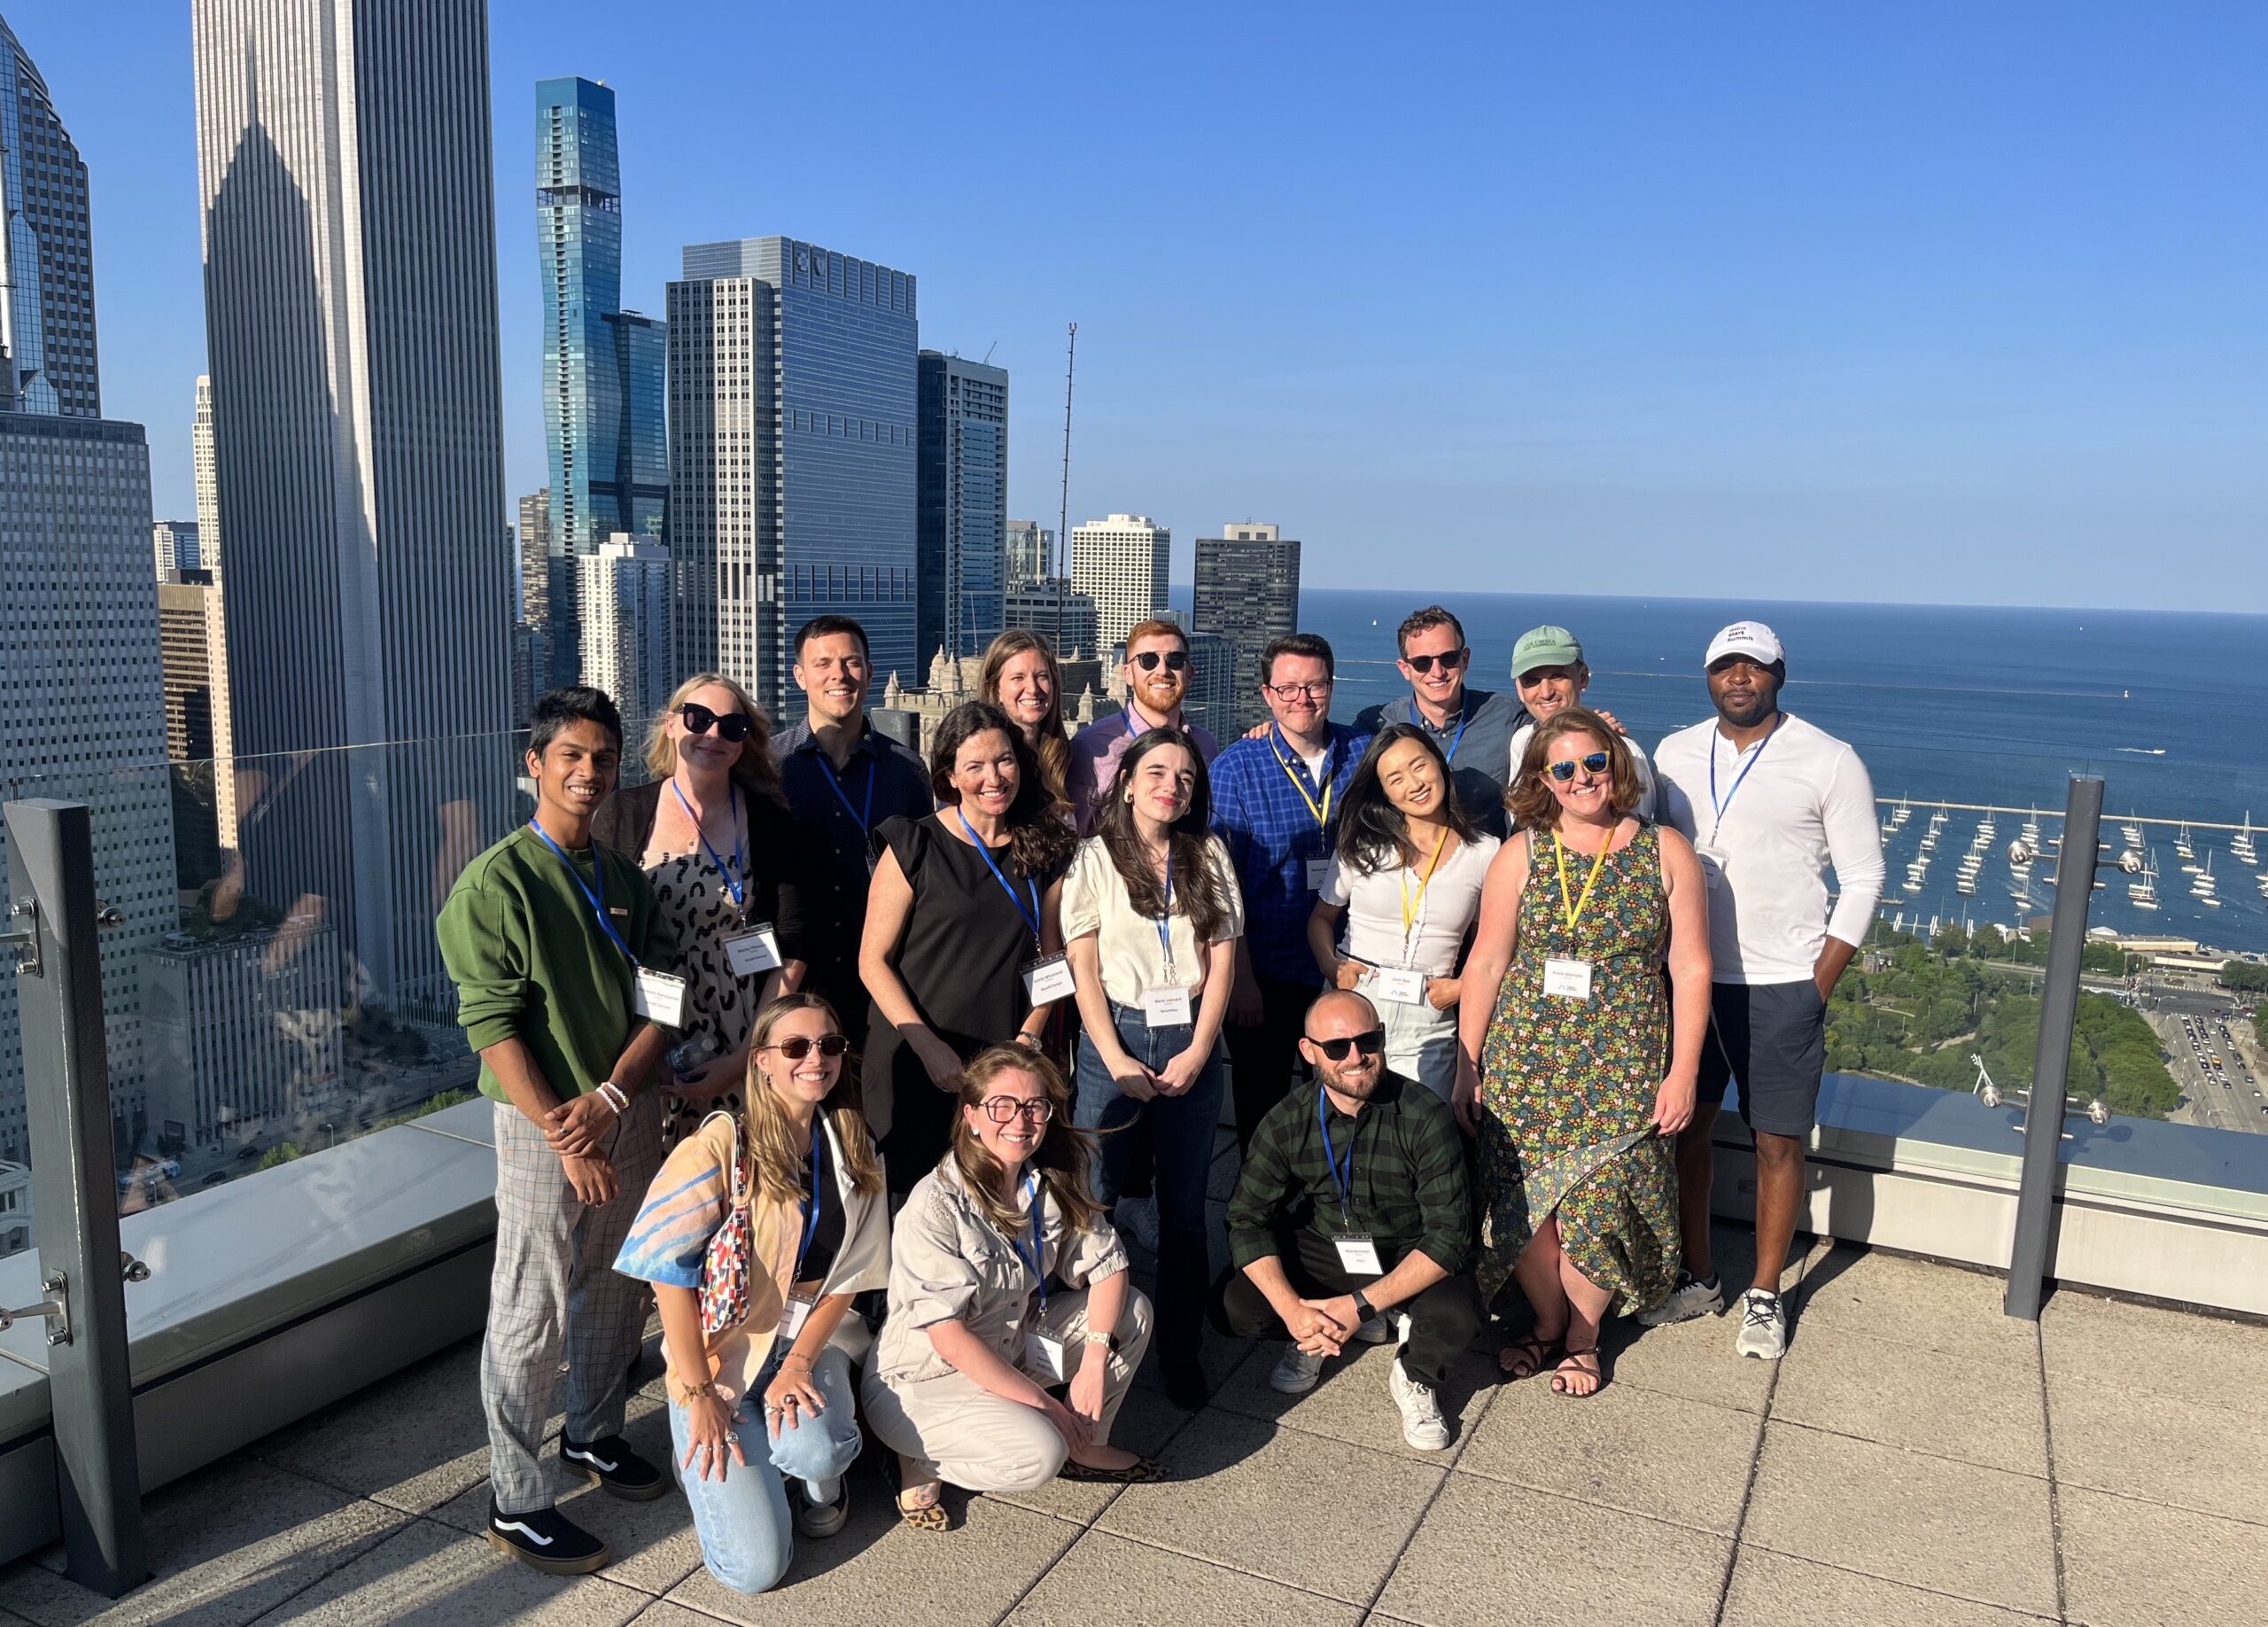 HGL6 founders in front of the Chicago skyline